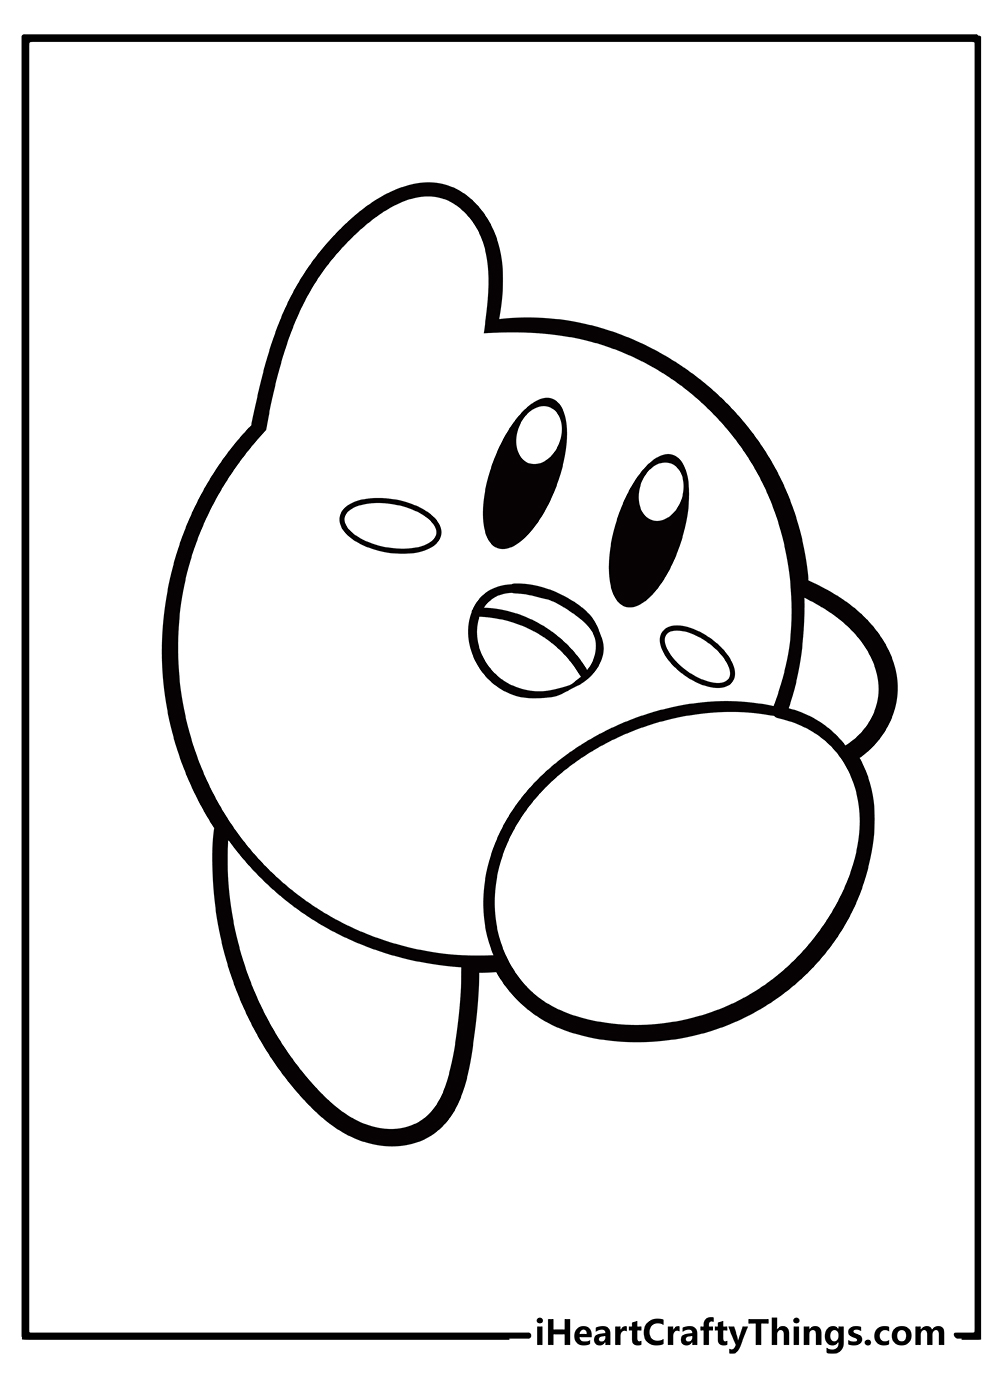 Kirby Coloring Pages for adults free printable